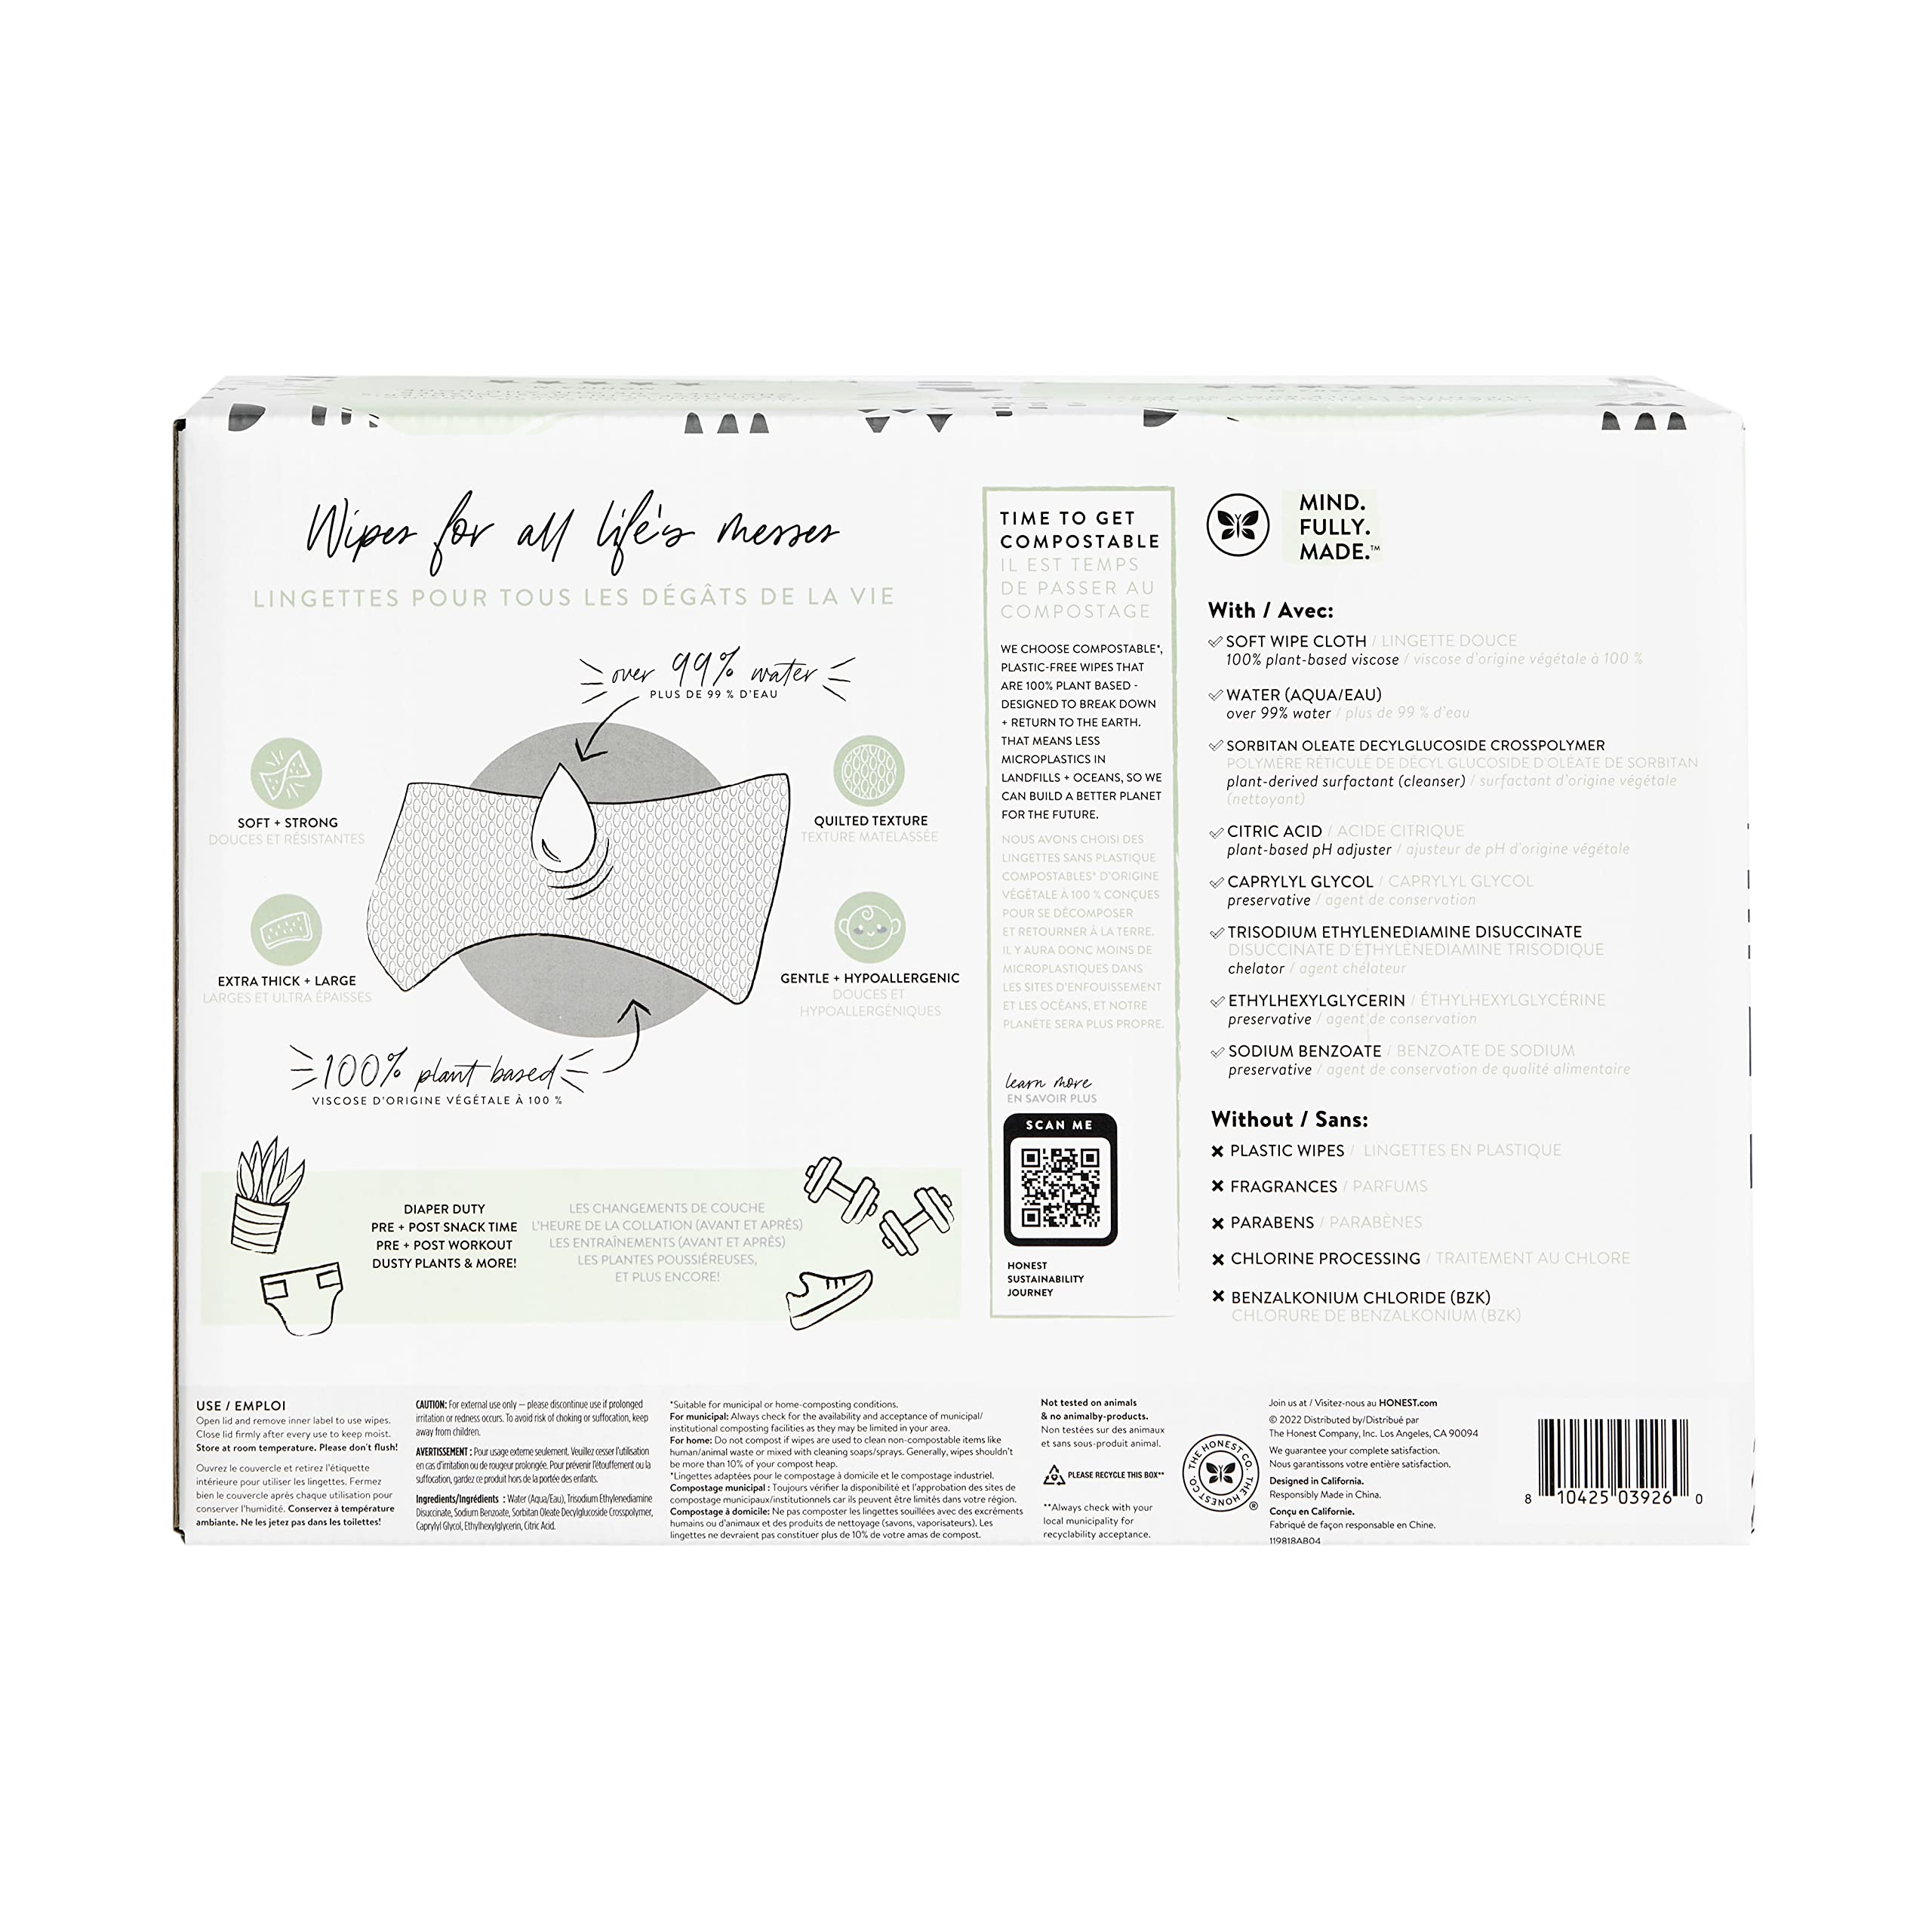 The Honest Company Clean Conscious Wipes | 99% Water, Compostable, Plant-Based, Baby Wipes | Hypoallergenic, EWG Verified | Pattern Play, 576 Count